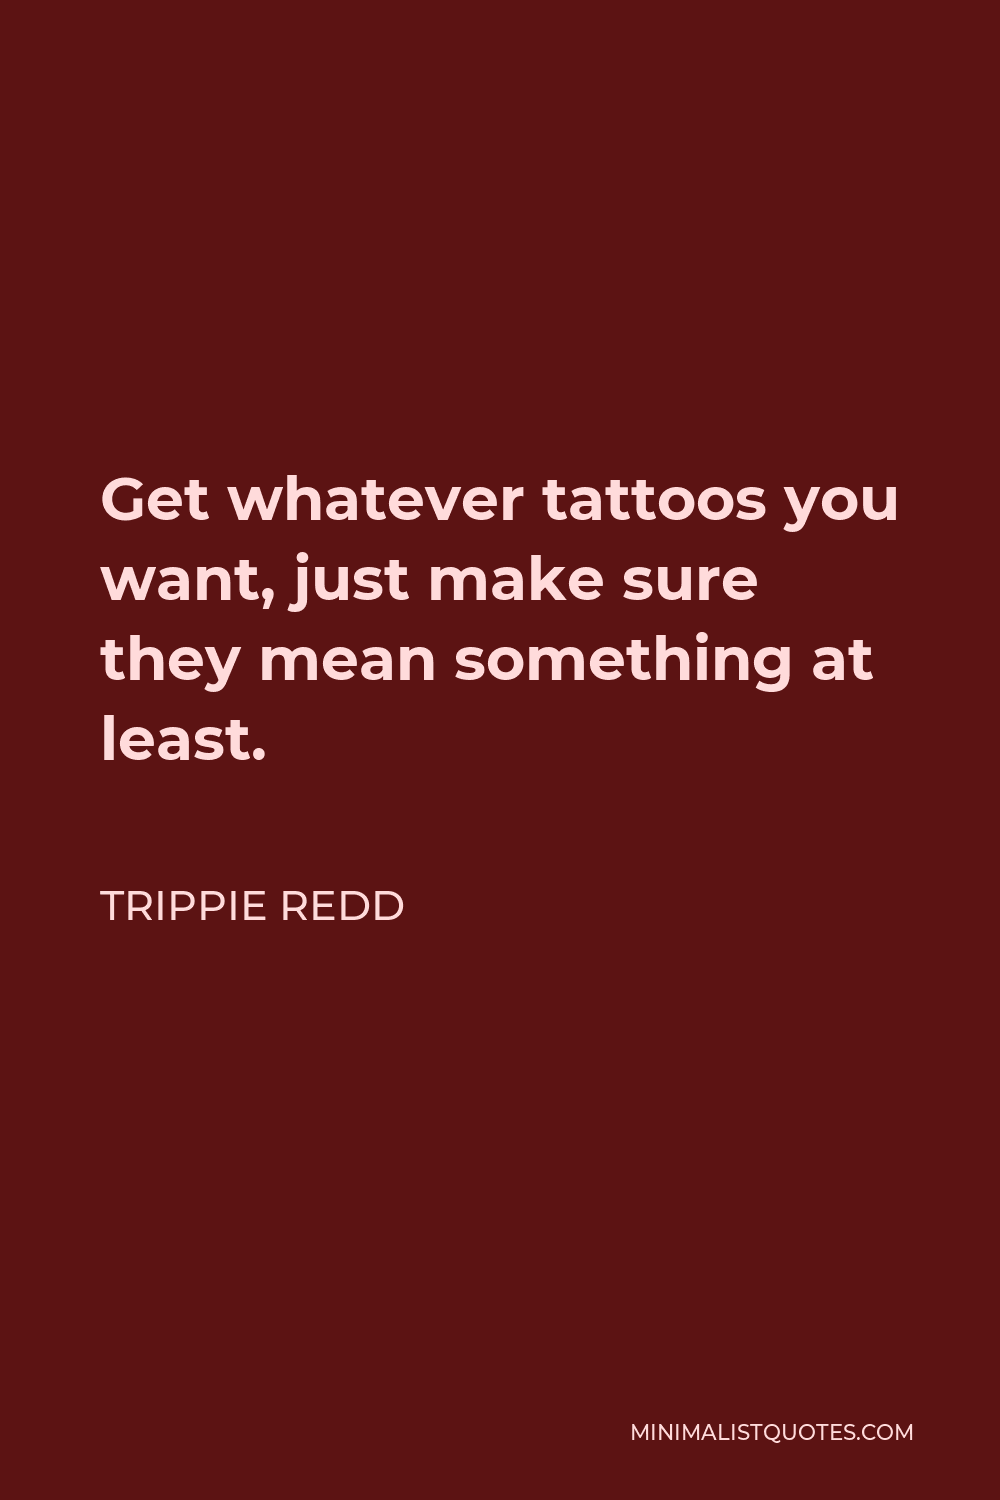 Trippie Redd Quote - Get whatever tattoos you want, just make sure they mean something at least.